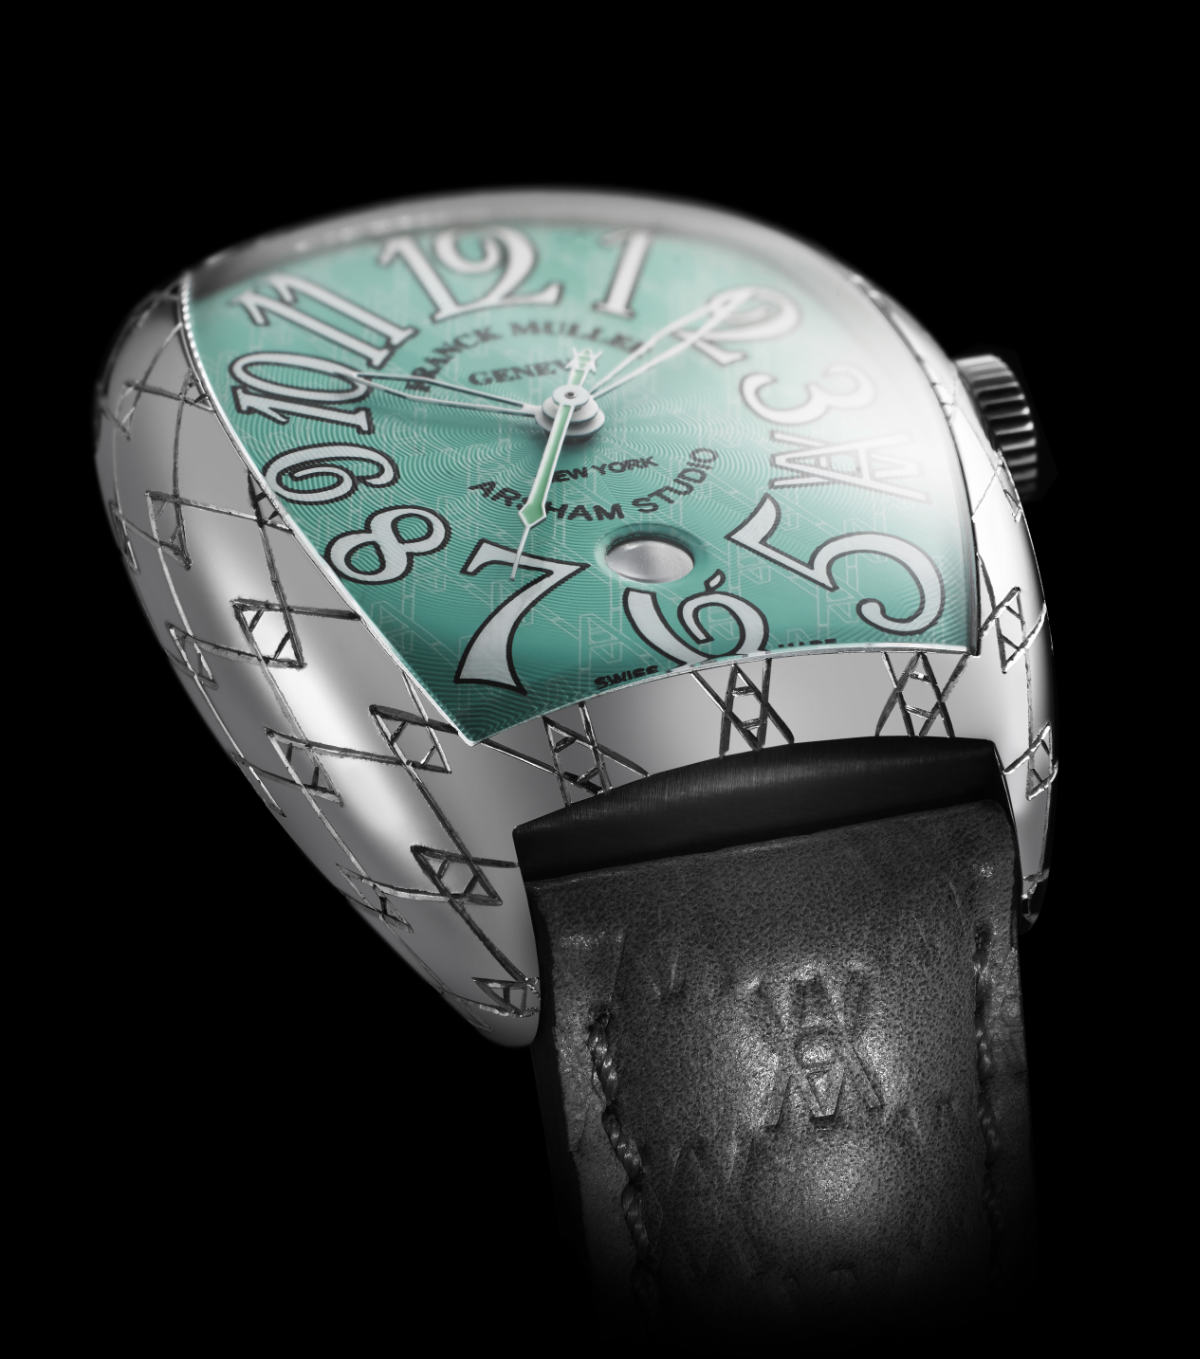 Casablanca - A New Limited Watch Edition From Franck Muller